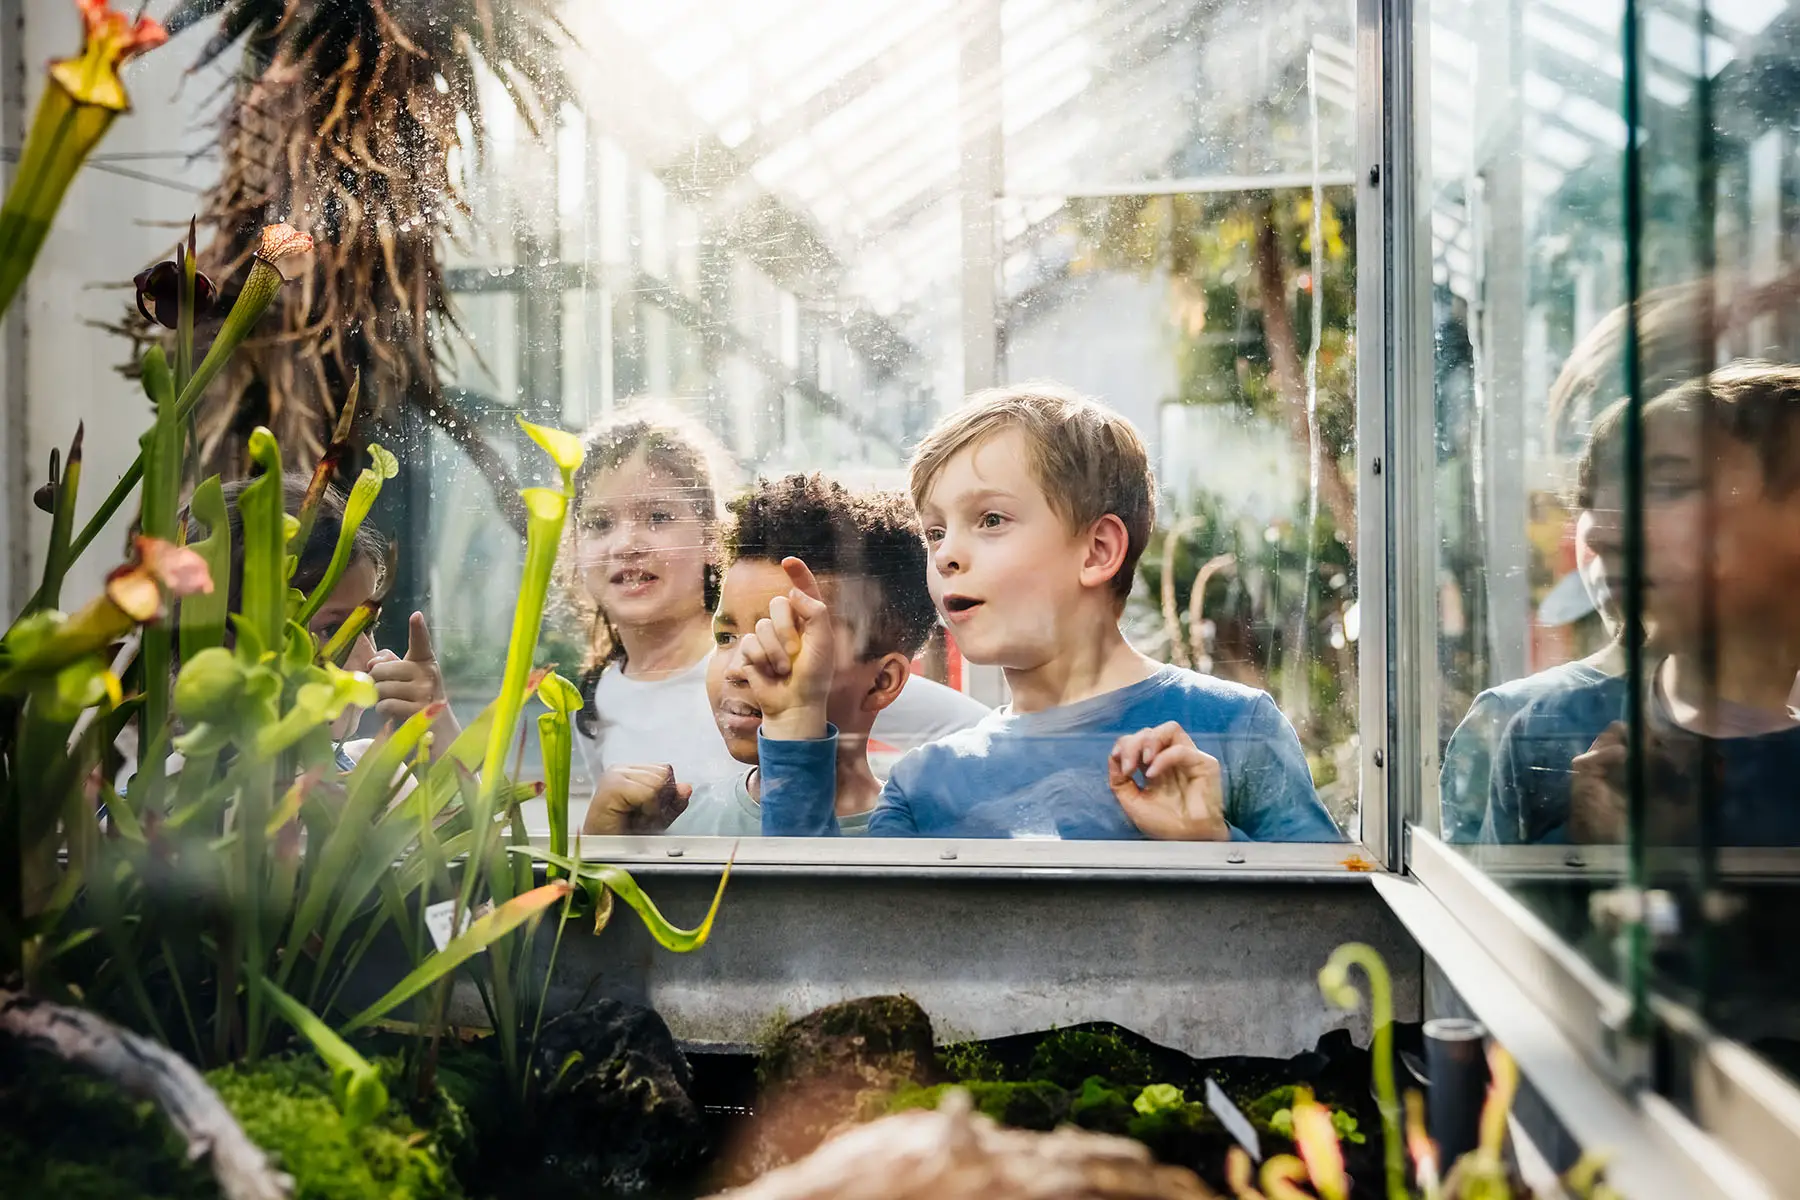 Some young children looking at exotic carnivorous plants on display in a greenhouse while on a school trip.